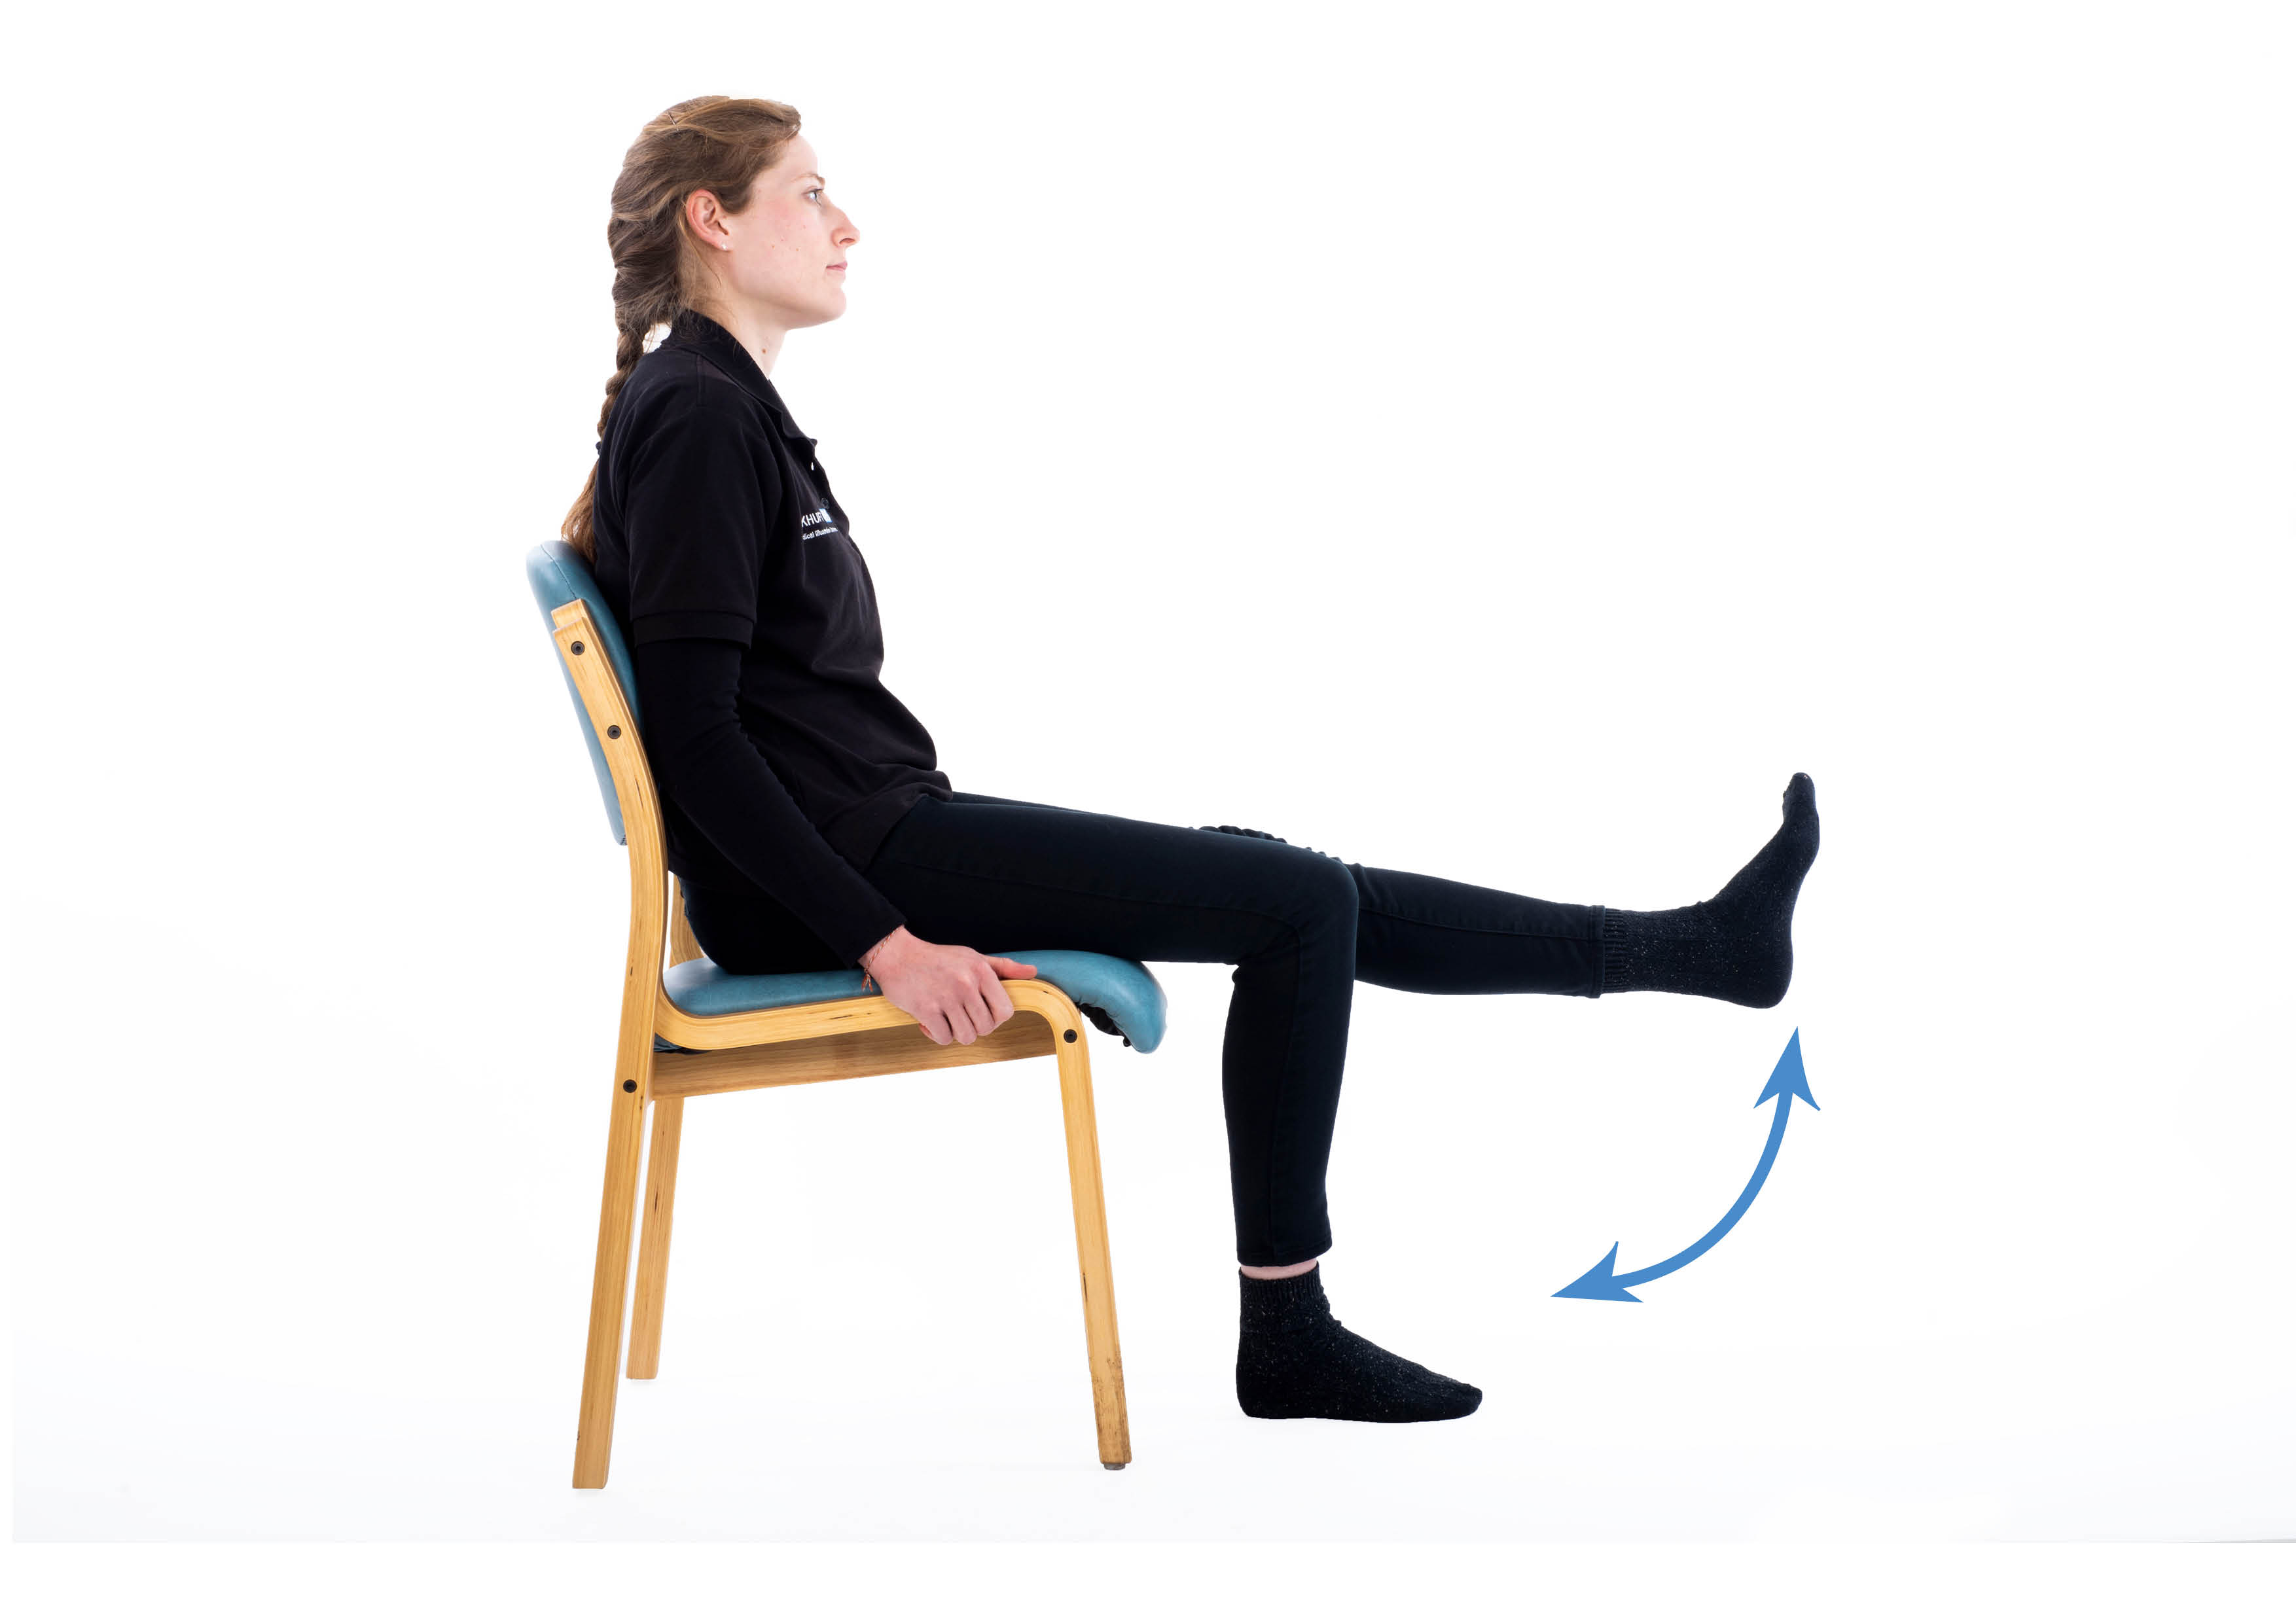 Knee flexion and extension exercise; slowly lift your foot off the floor, and straighten your knee. Hold for 3 seconds and lower your leg slowly.